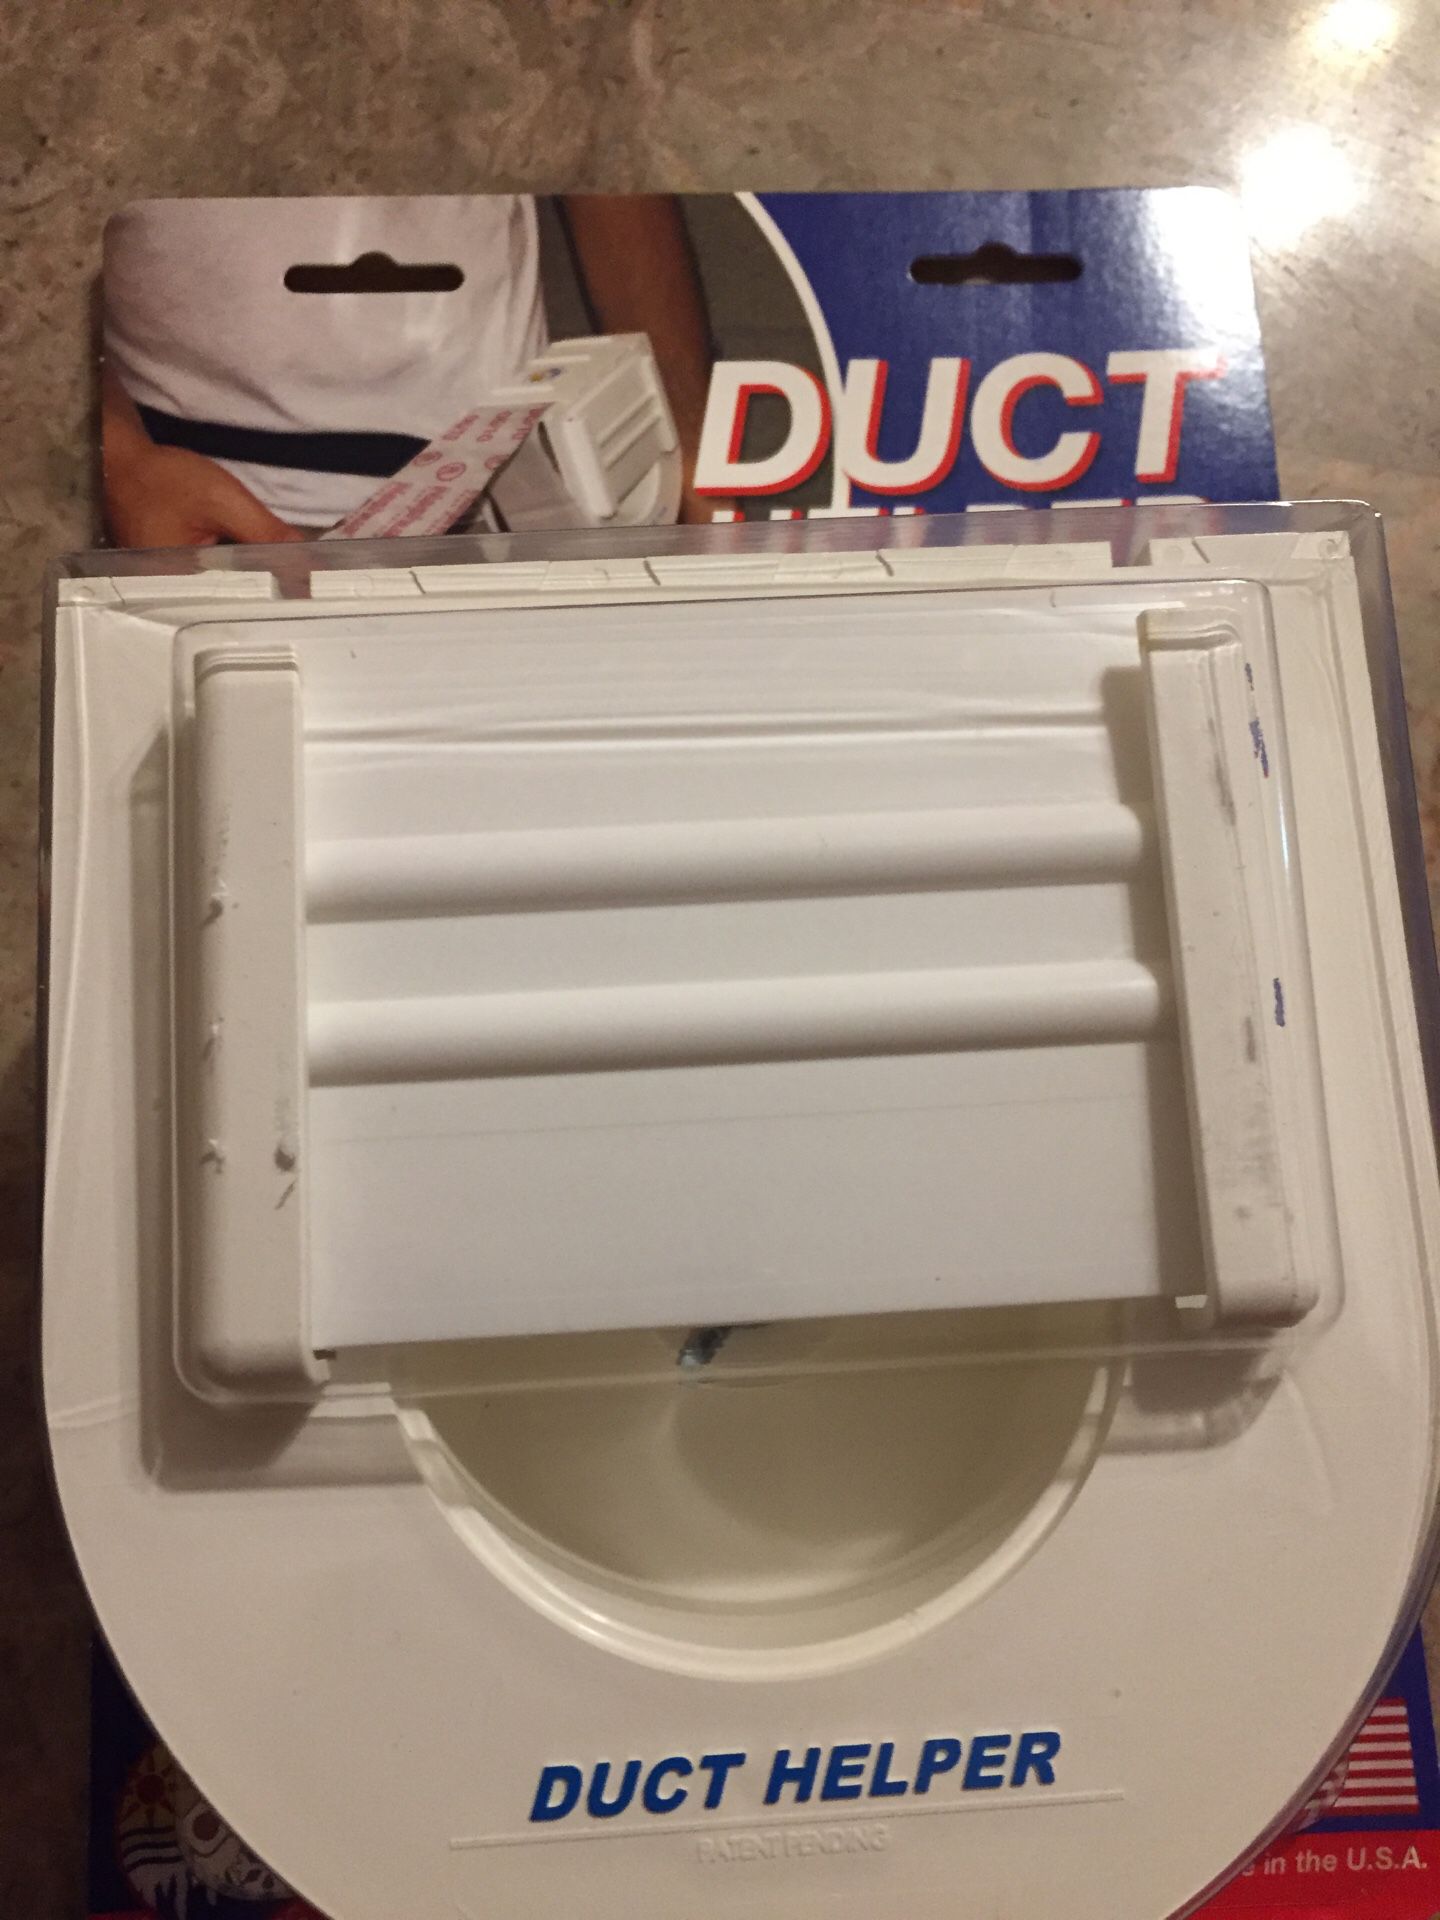 Duct tape dispenser- New product for a/c and duct installers